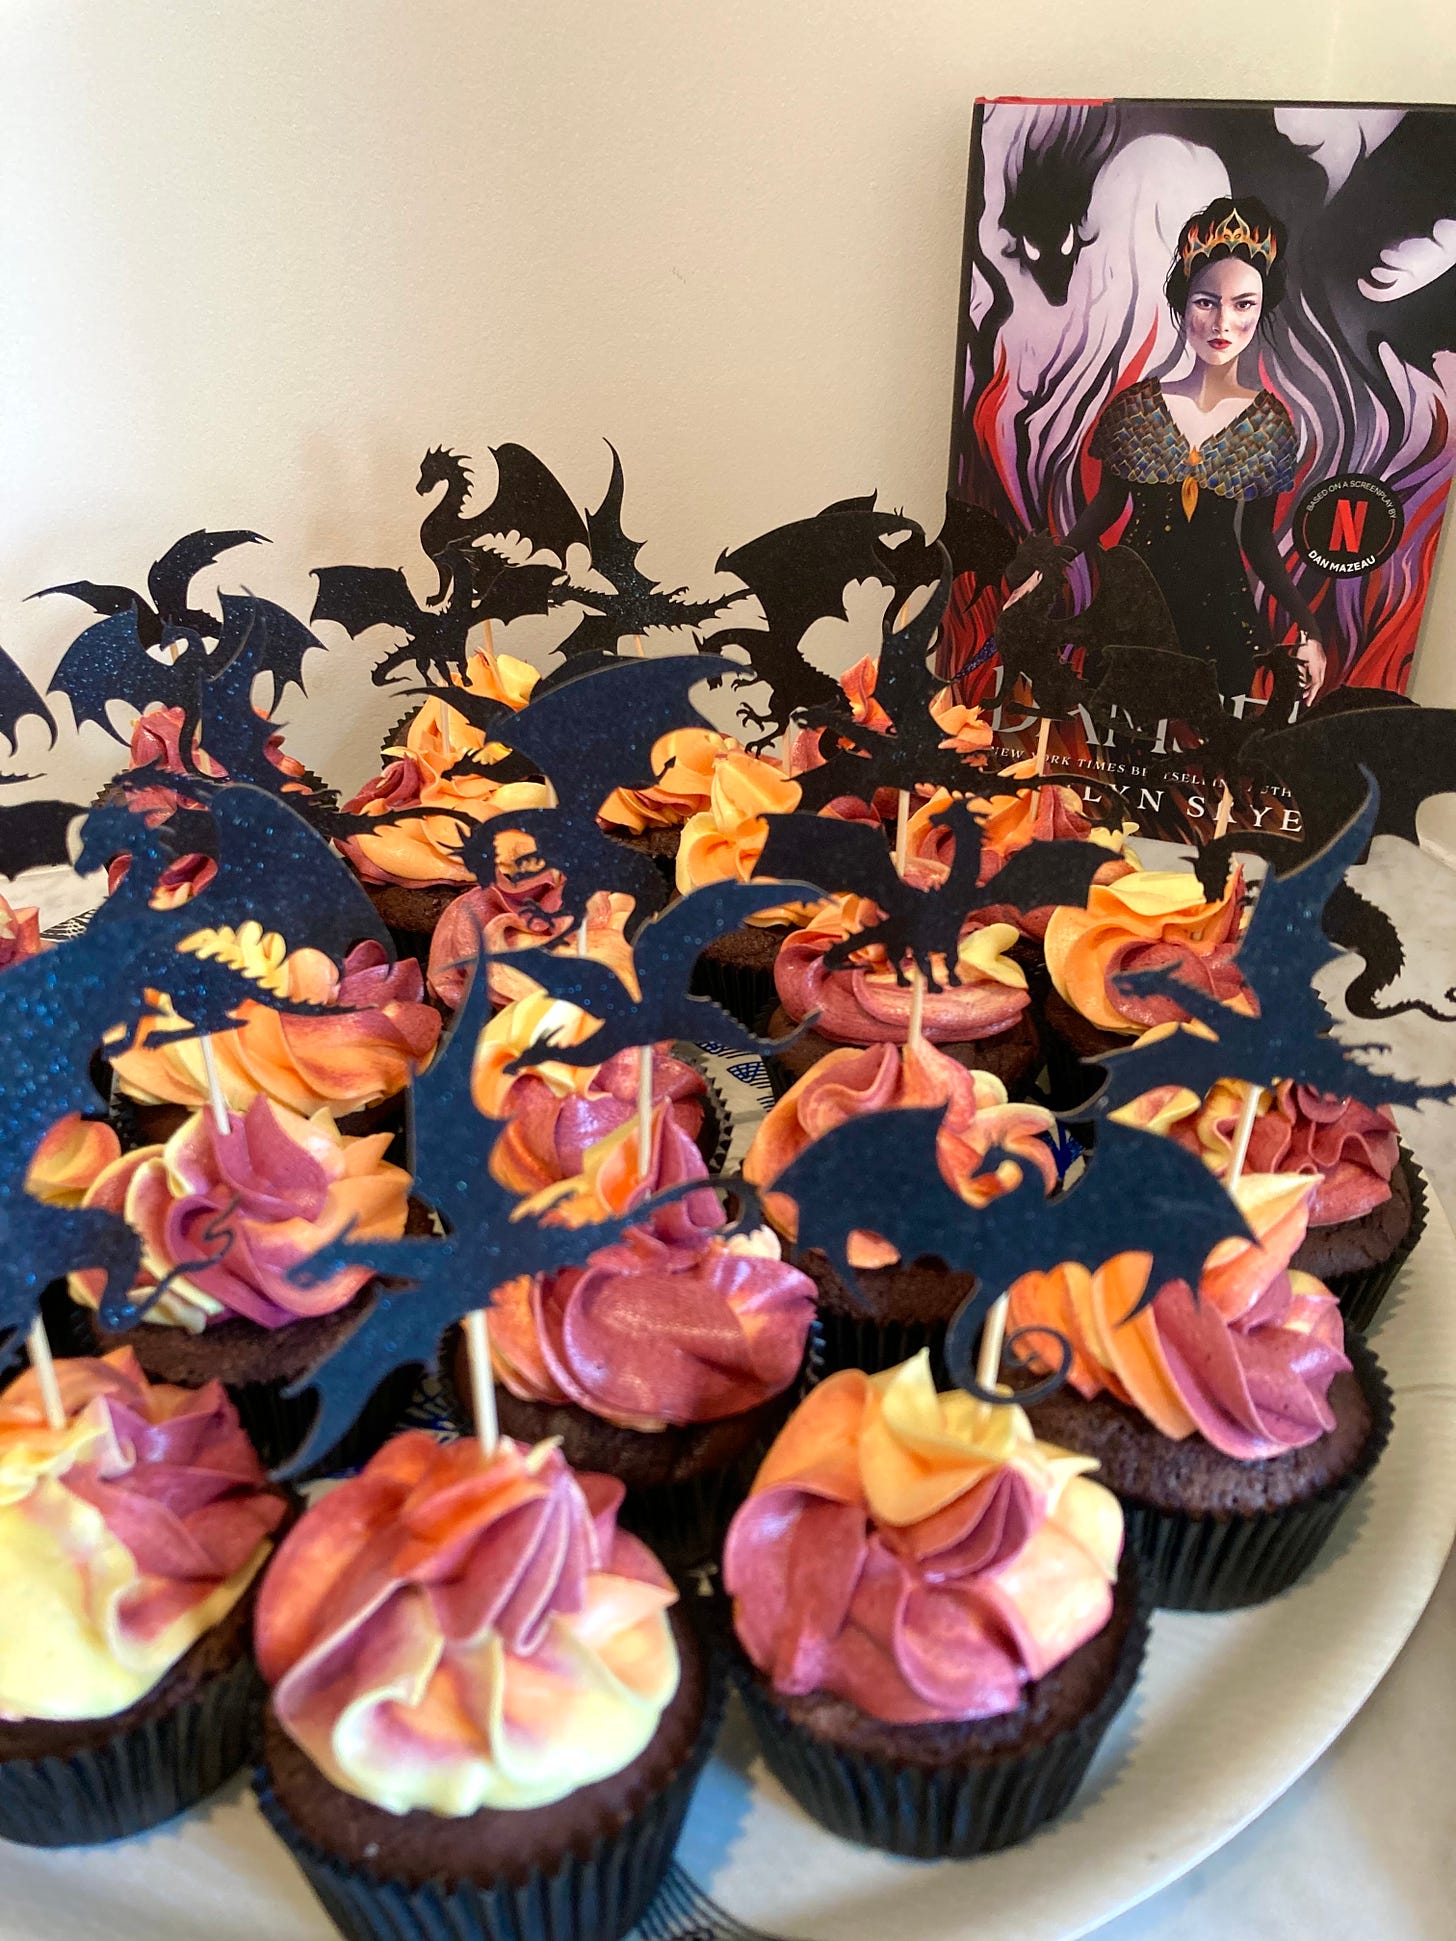 Dragonfire-frosted cupcakes at the Damsel book launch party, baked by the author’s daughter